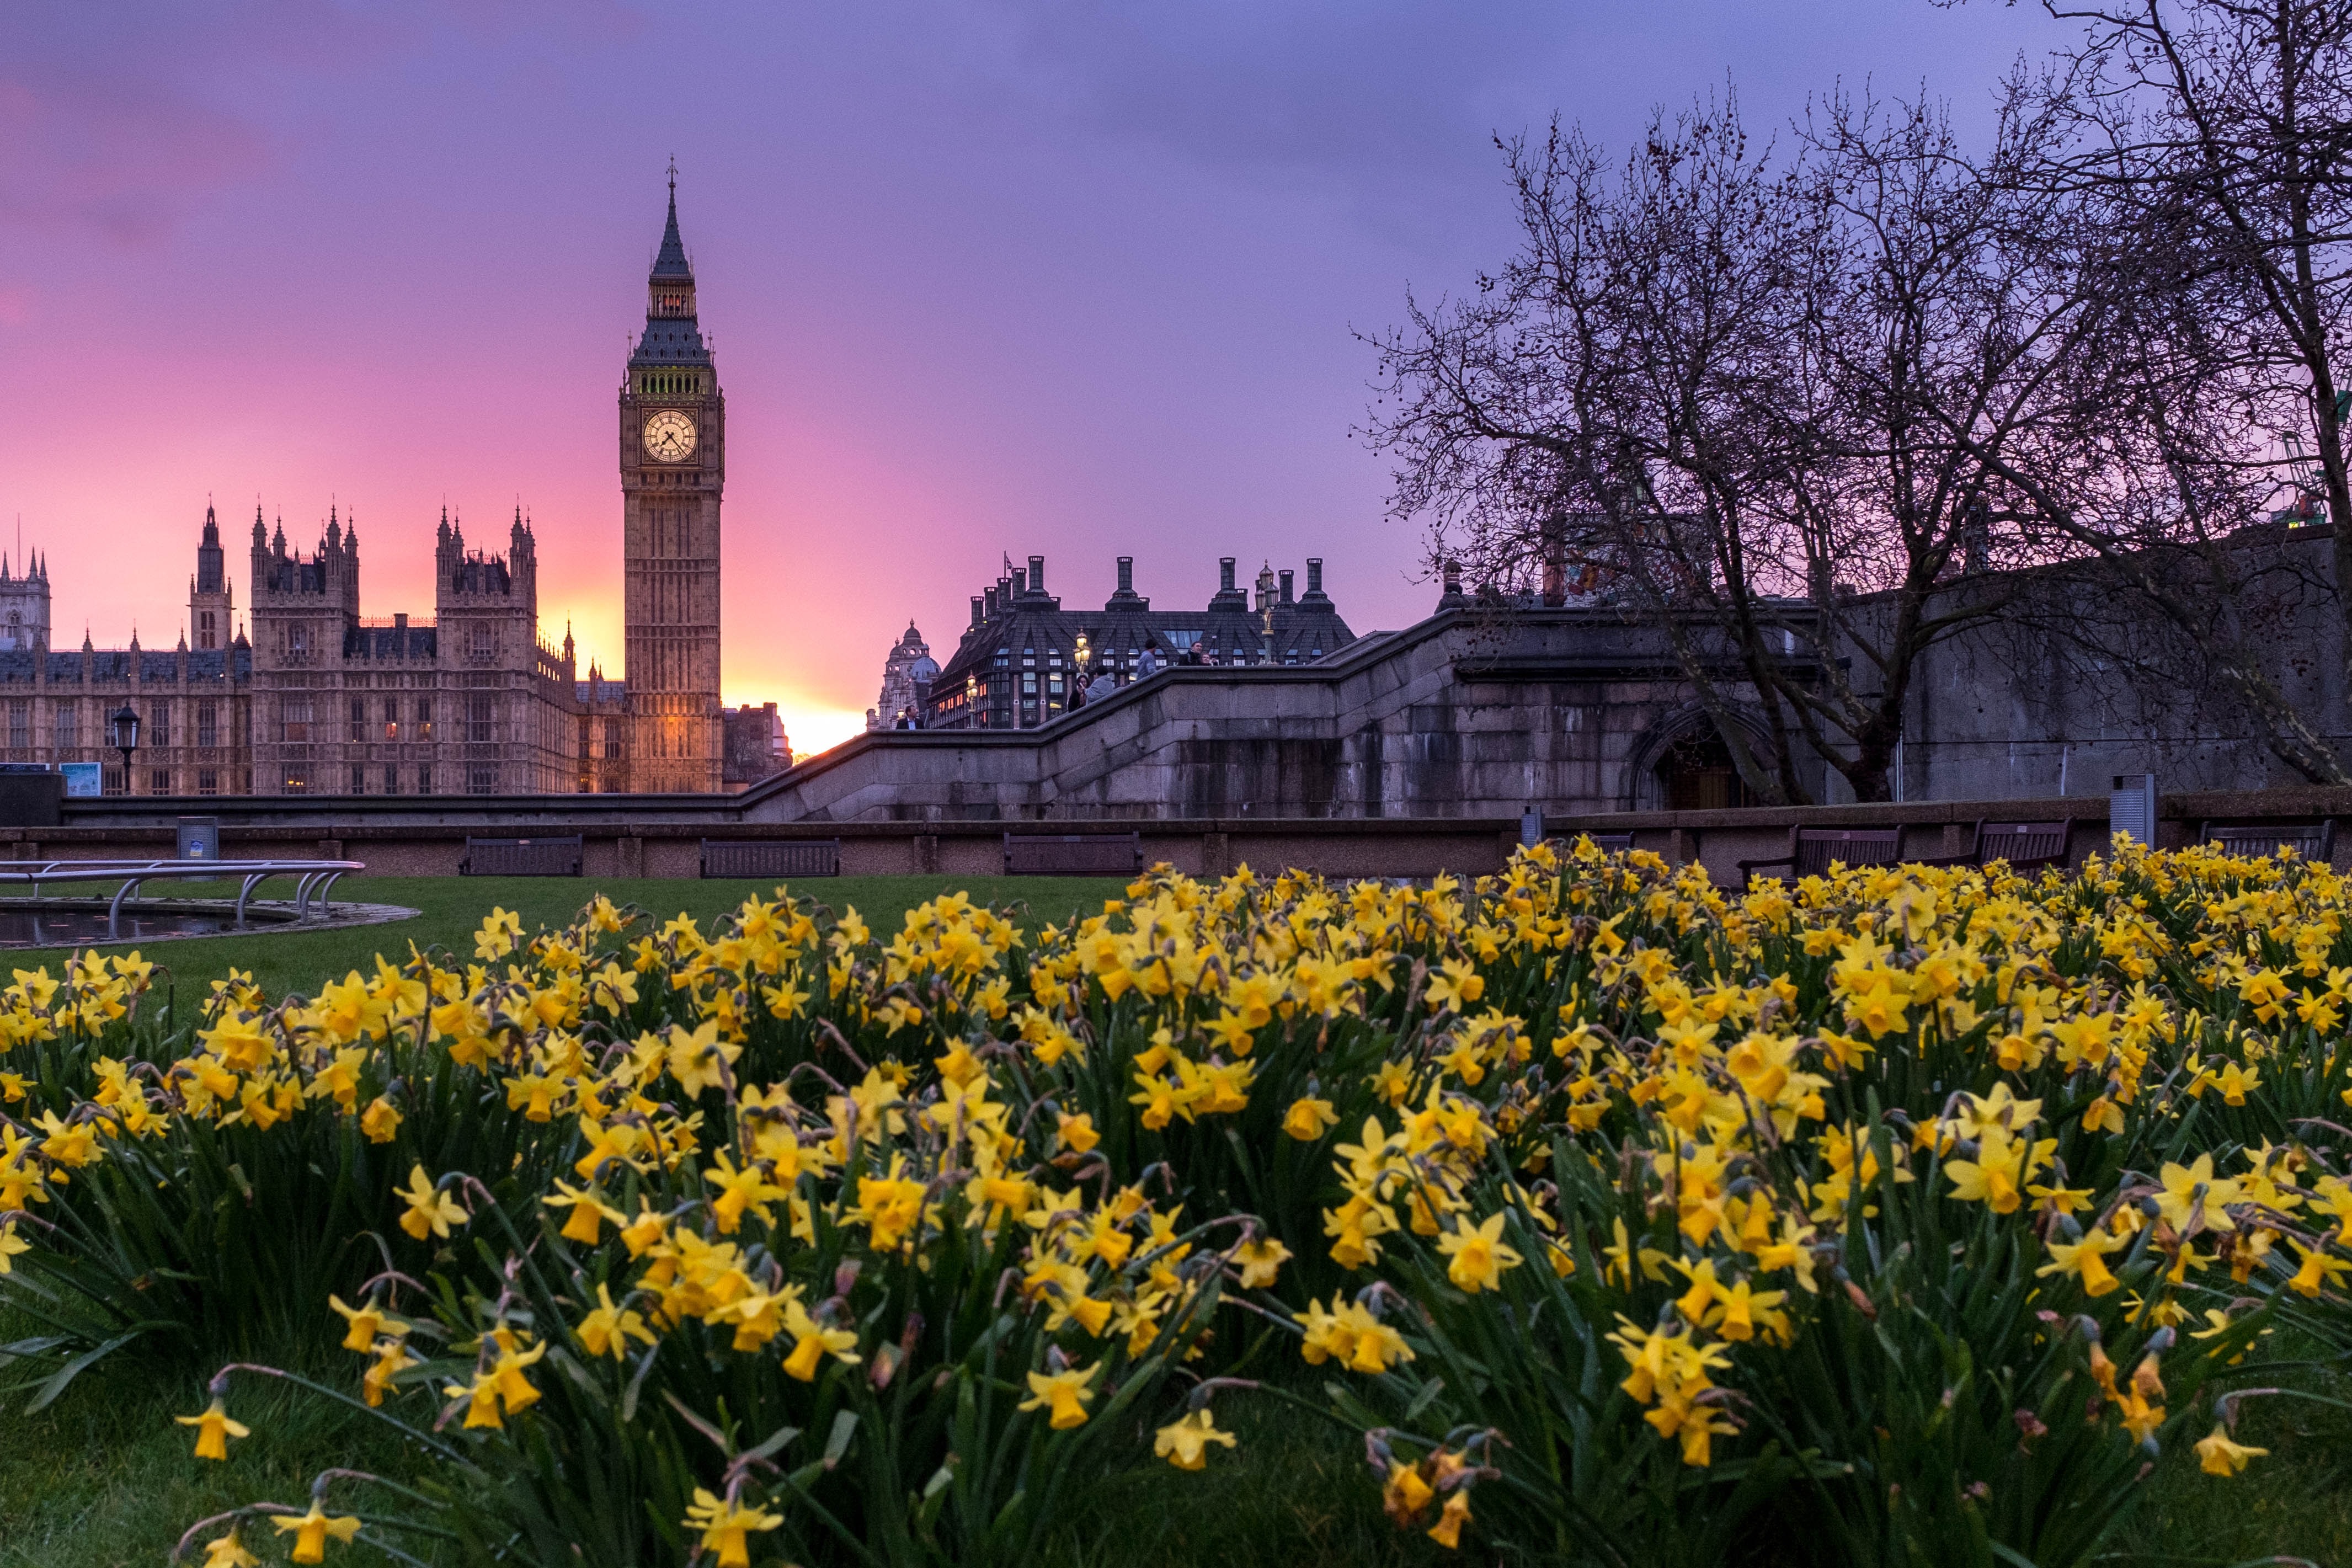 Westminster Parliament and Big Ben with Daffodils in the Foreground